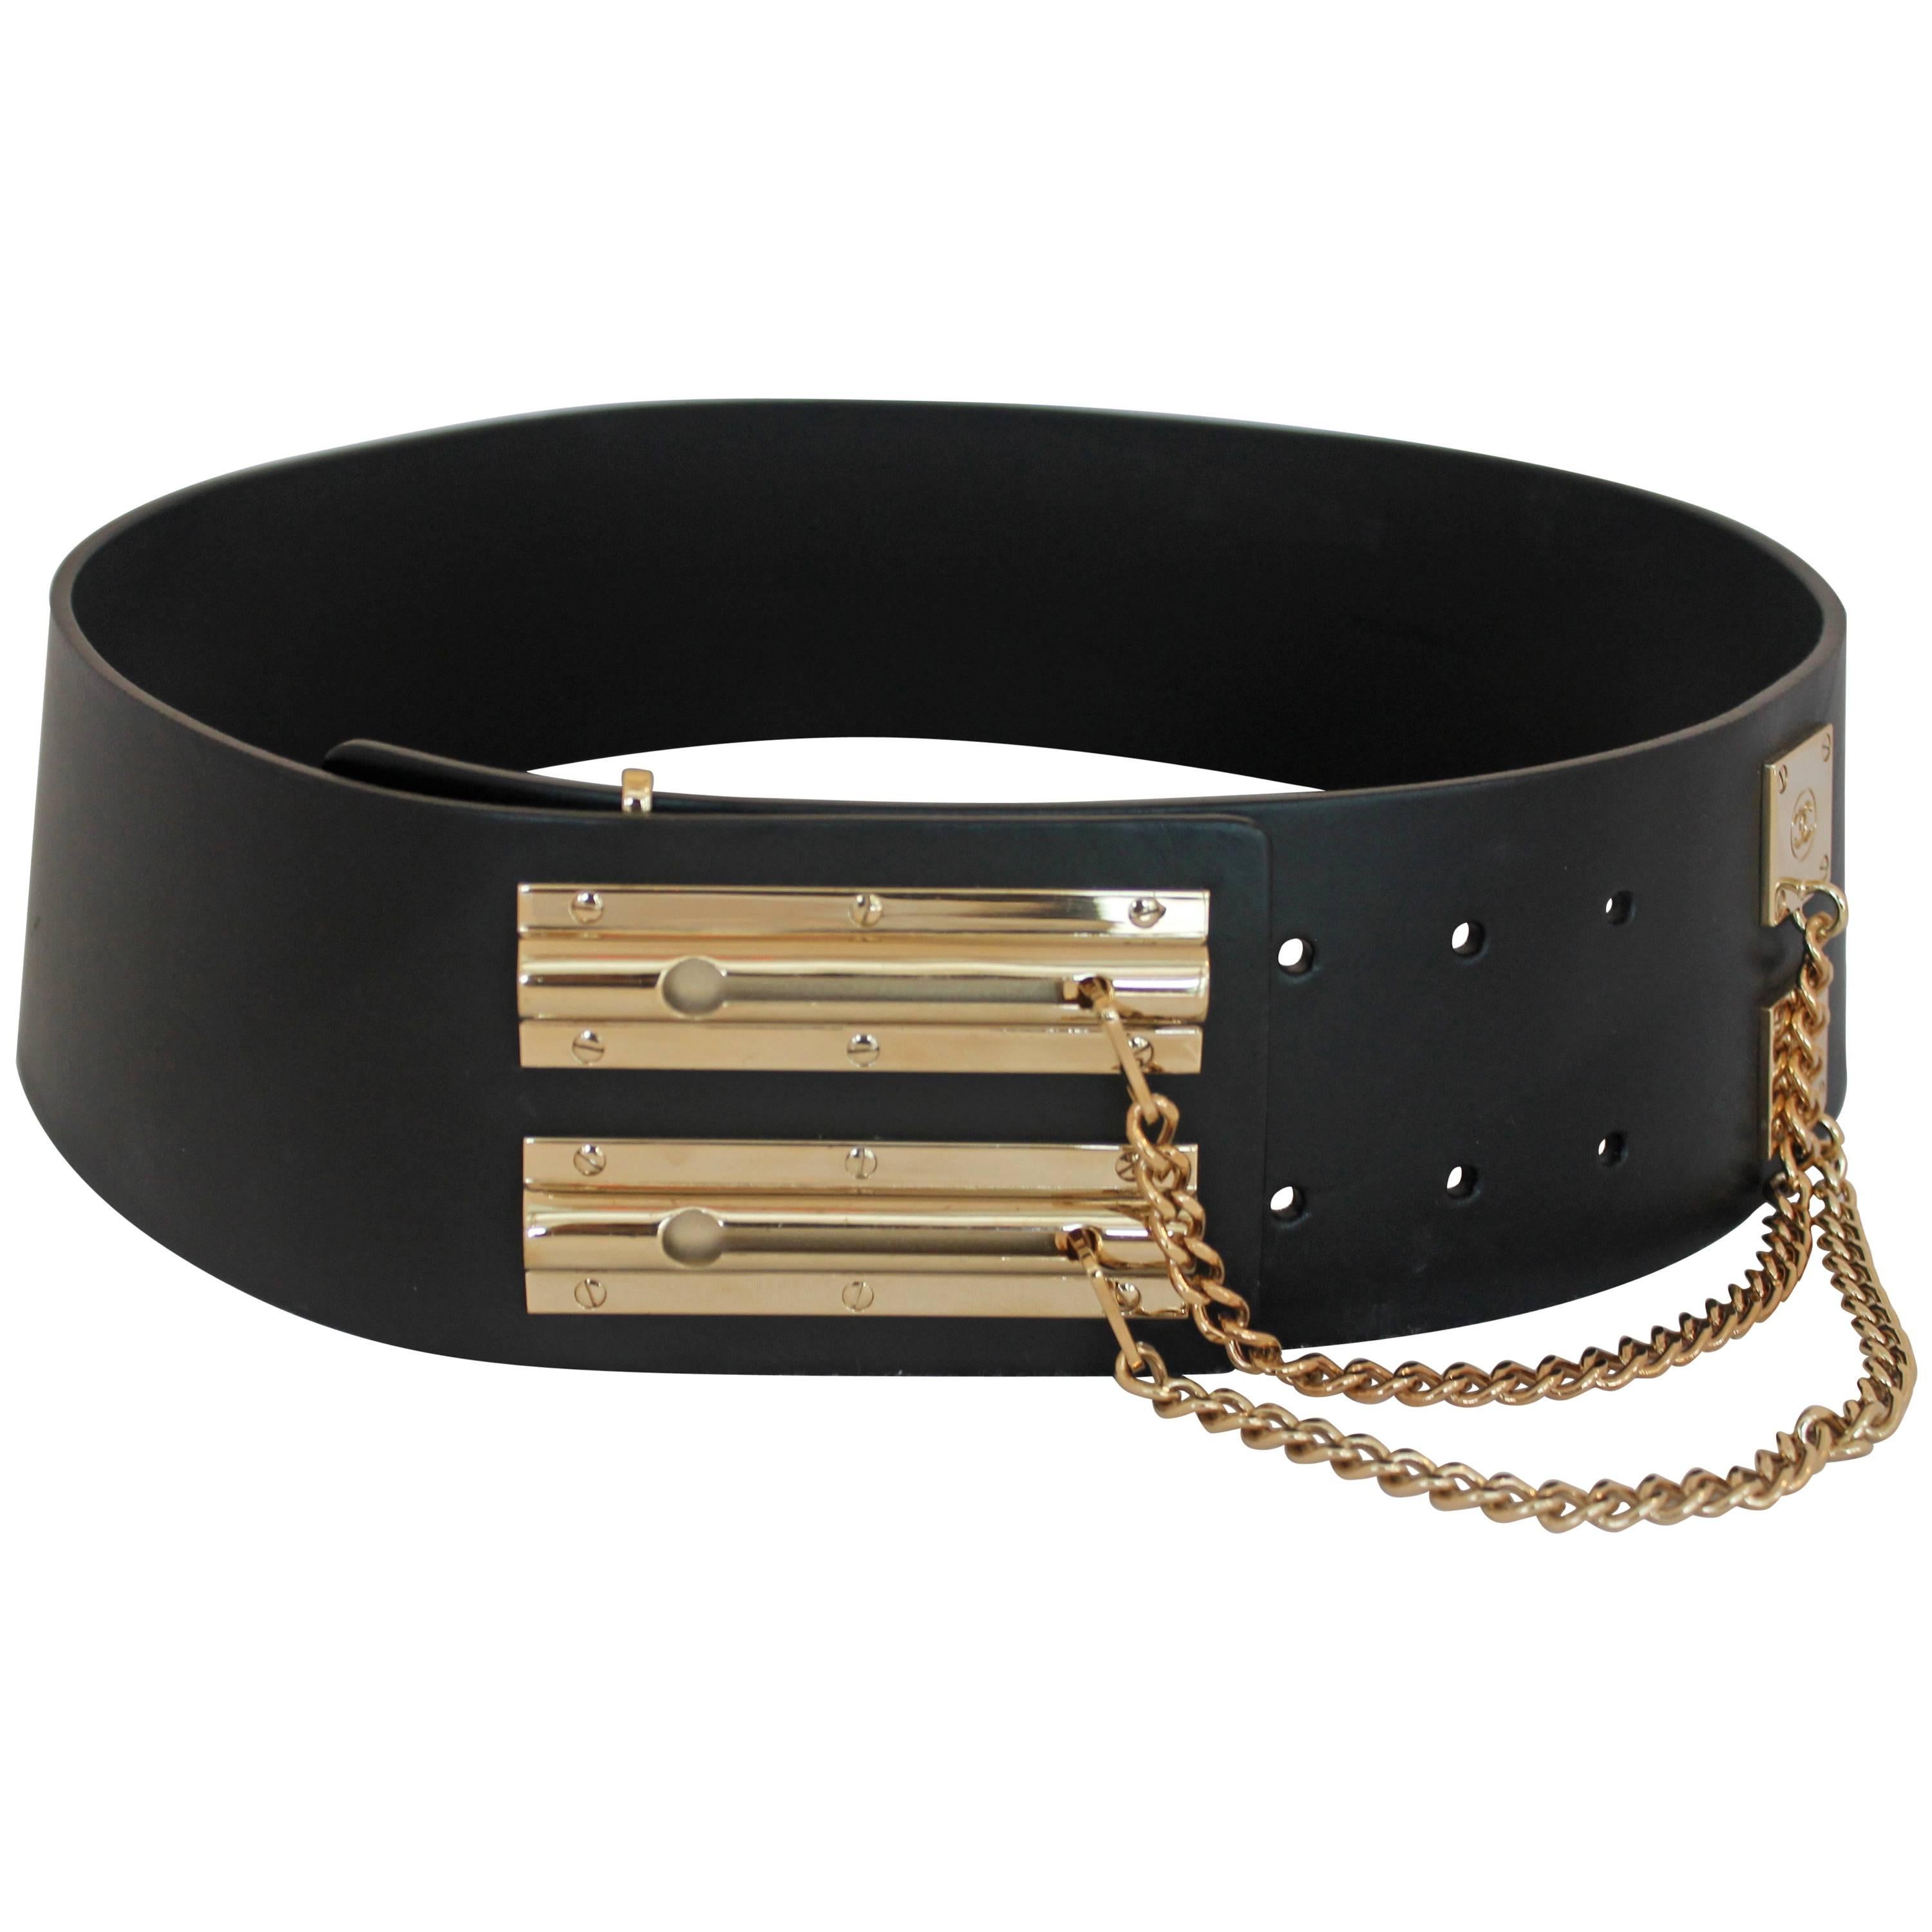 Chanel Black Leather with Gold Slide Lock & Chain Belt - 02P